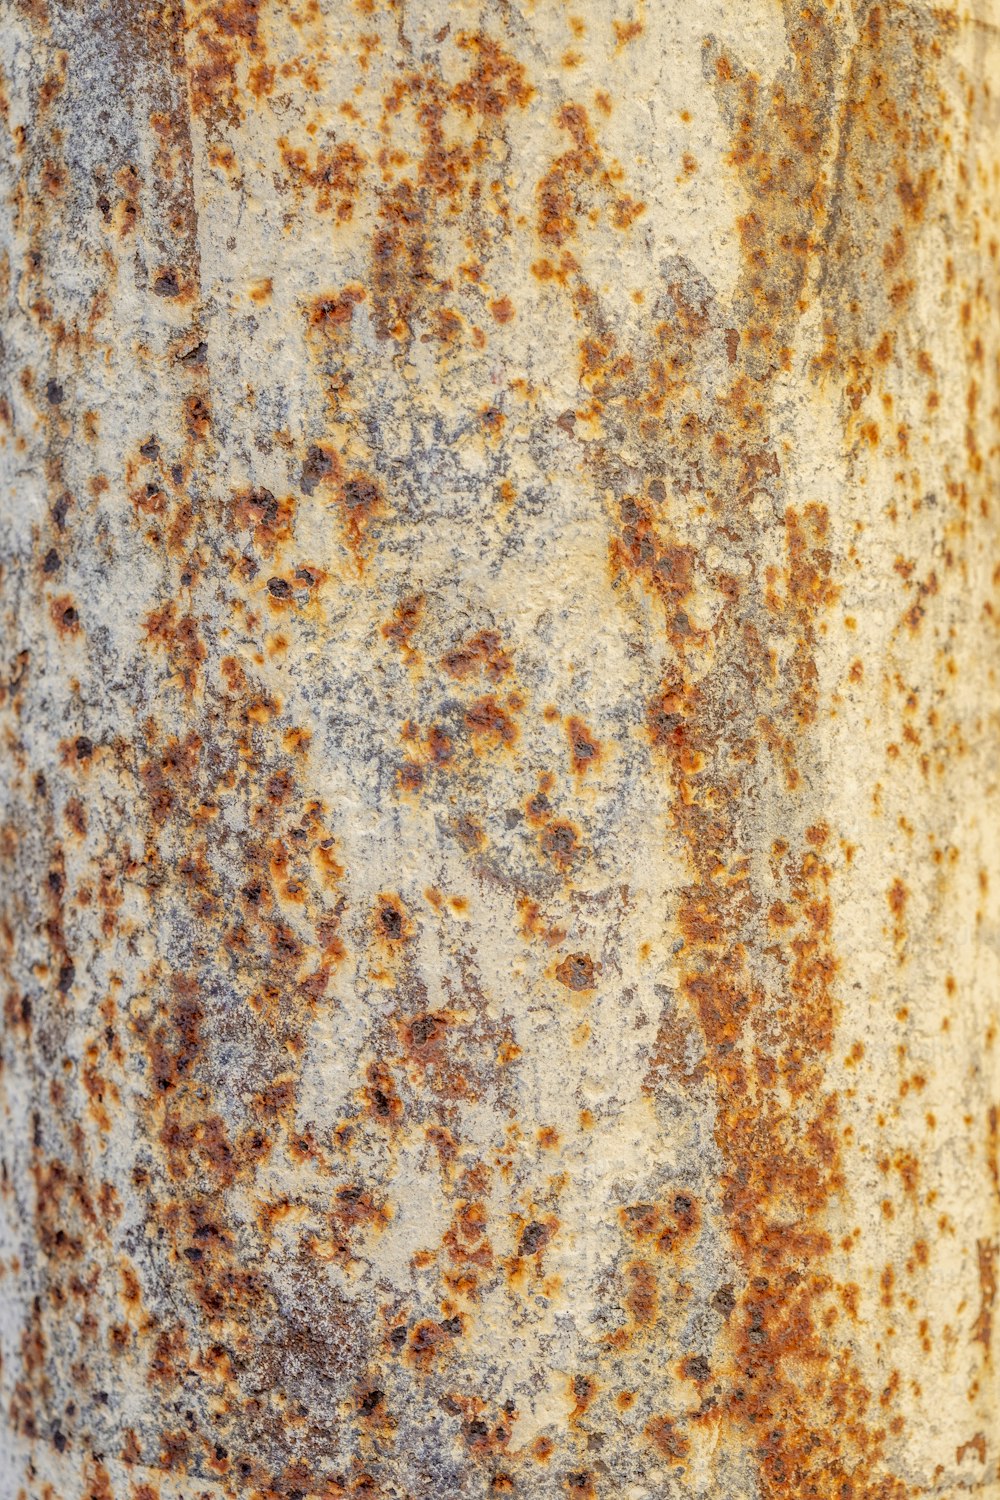 a rusted metal surface with some rust on it